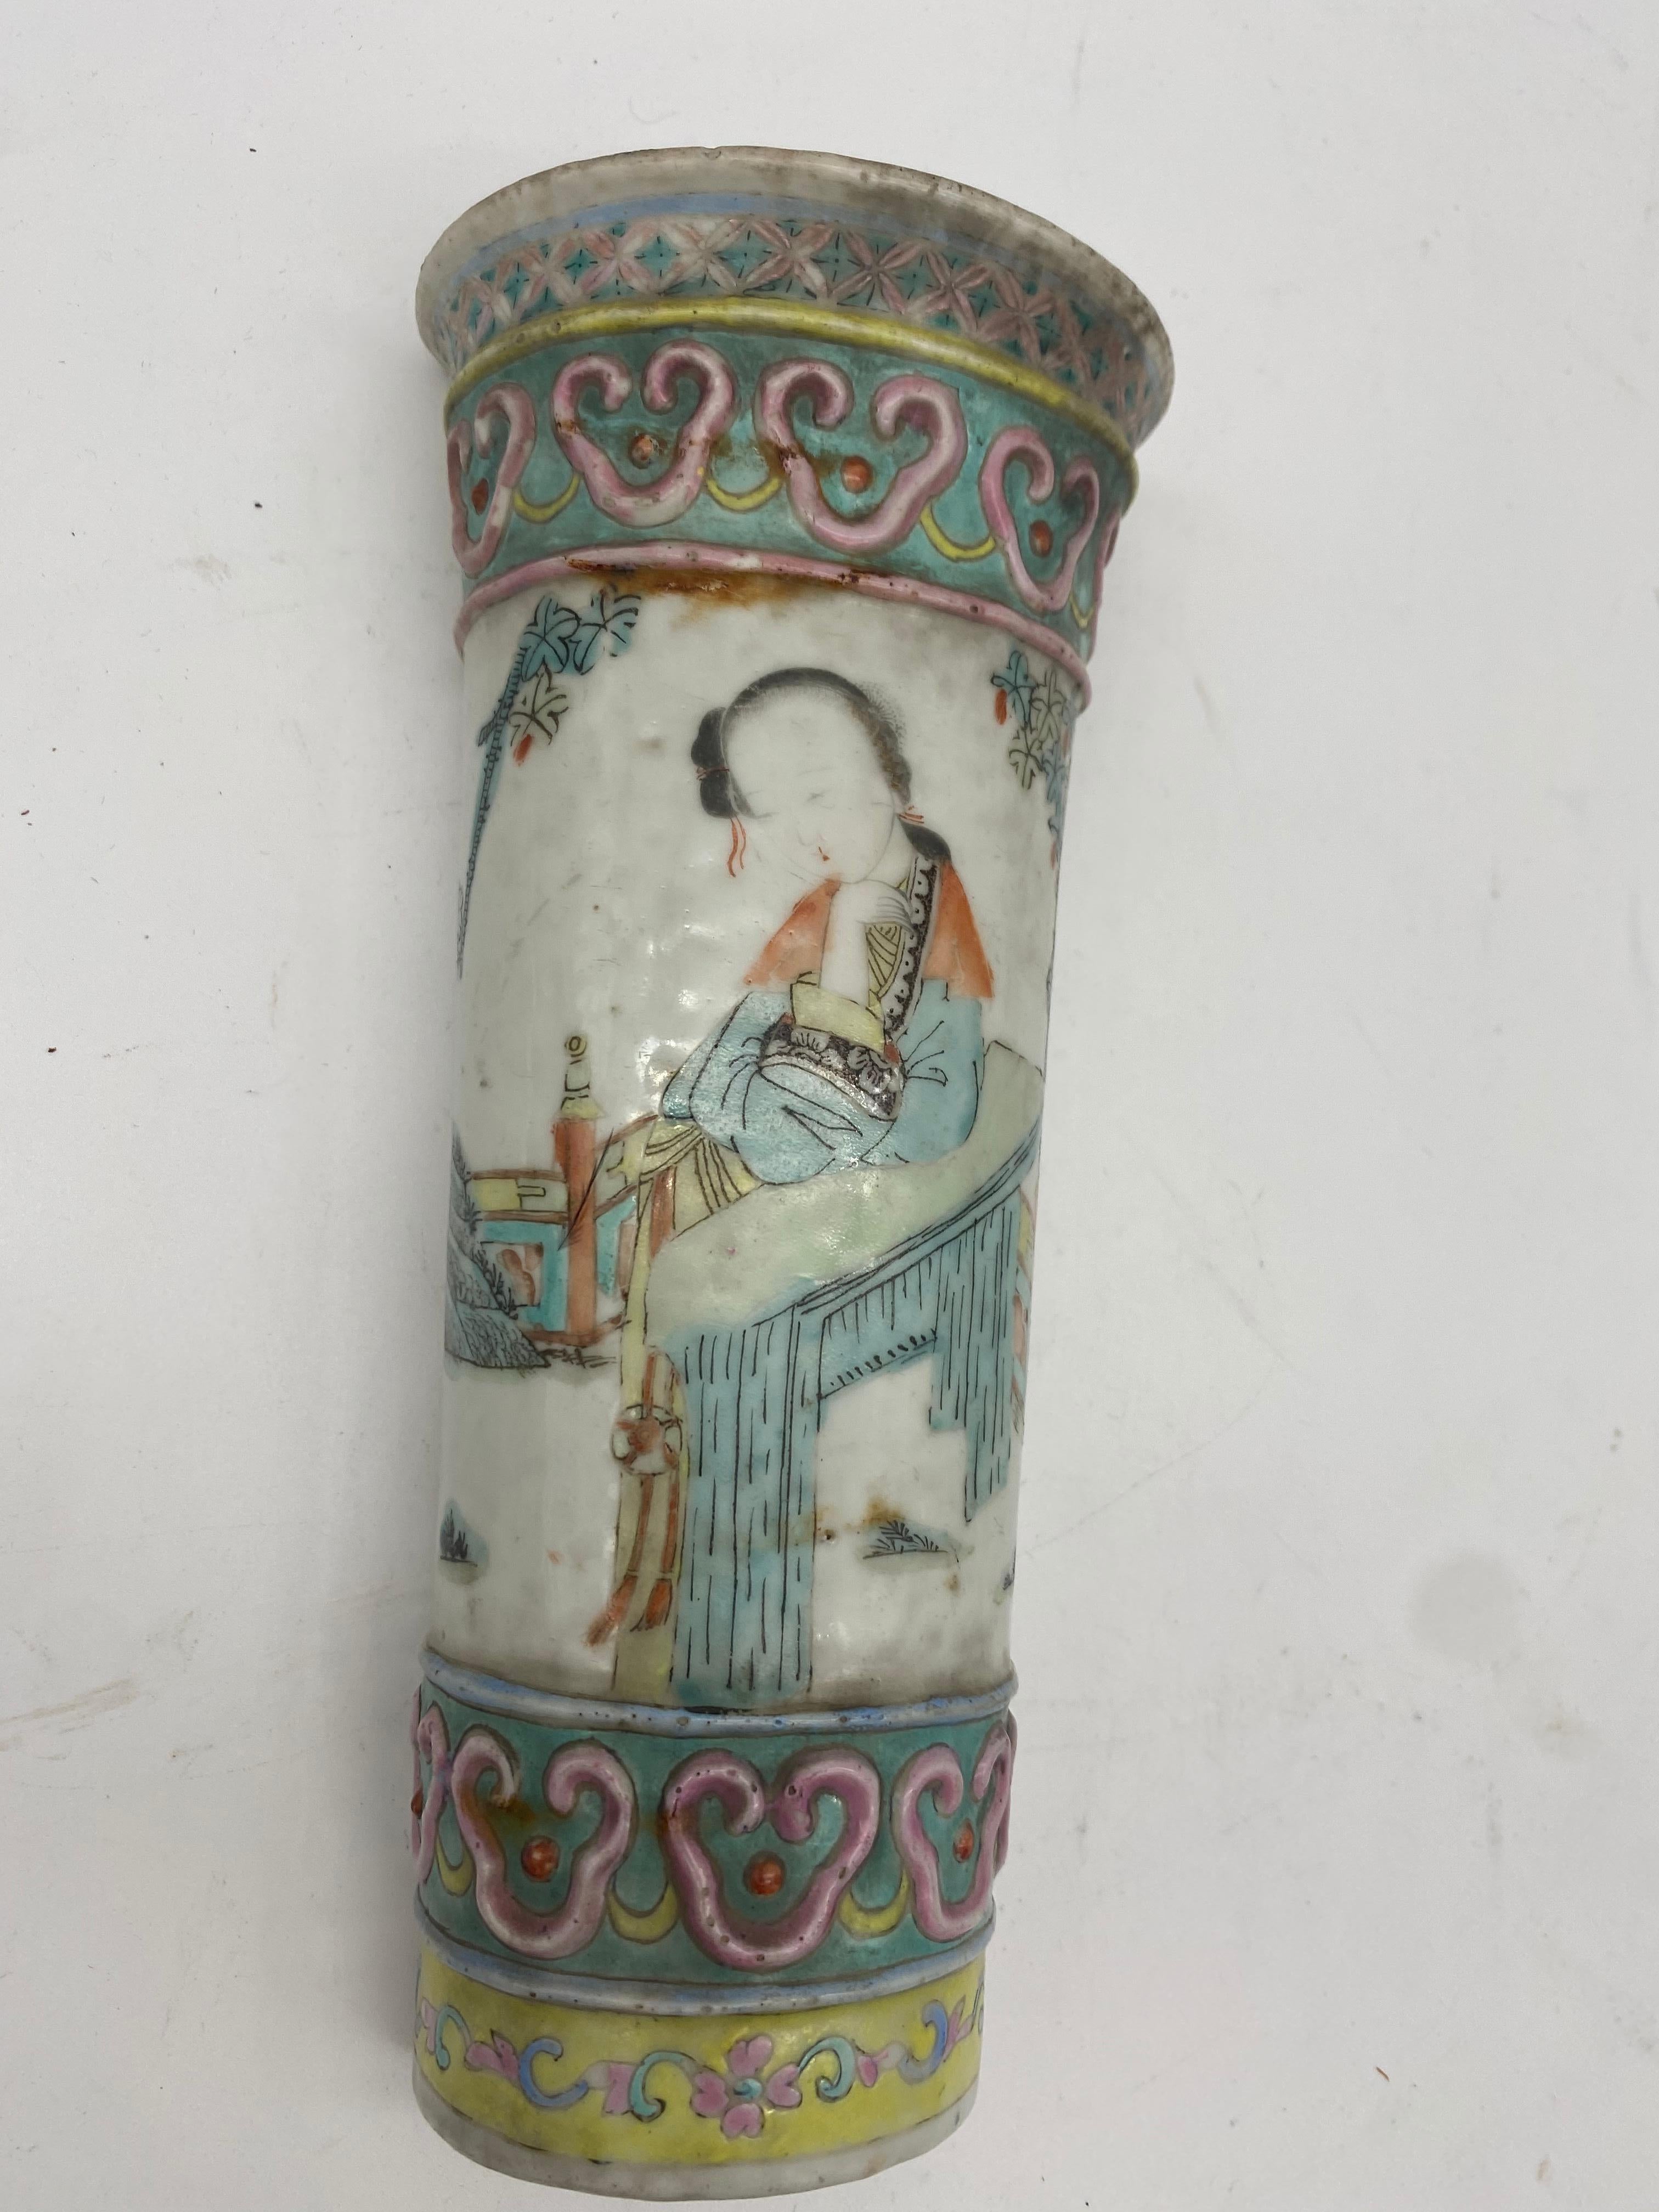 Qing Dynasty antique Chinese Hand Painted Wall Hanging Porcelain Vase In Good Condition For Sale In Brea, CA